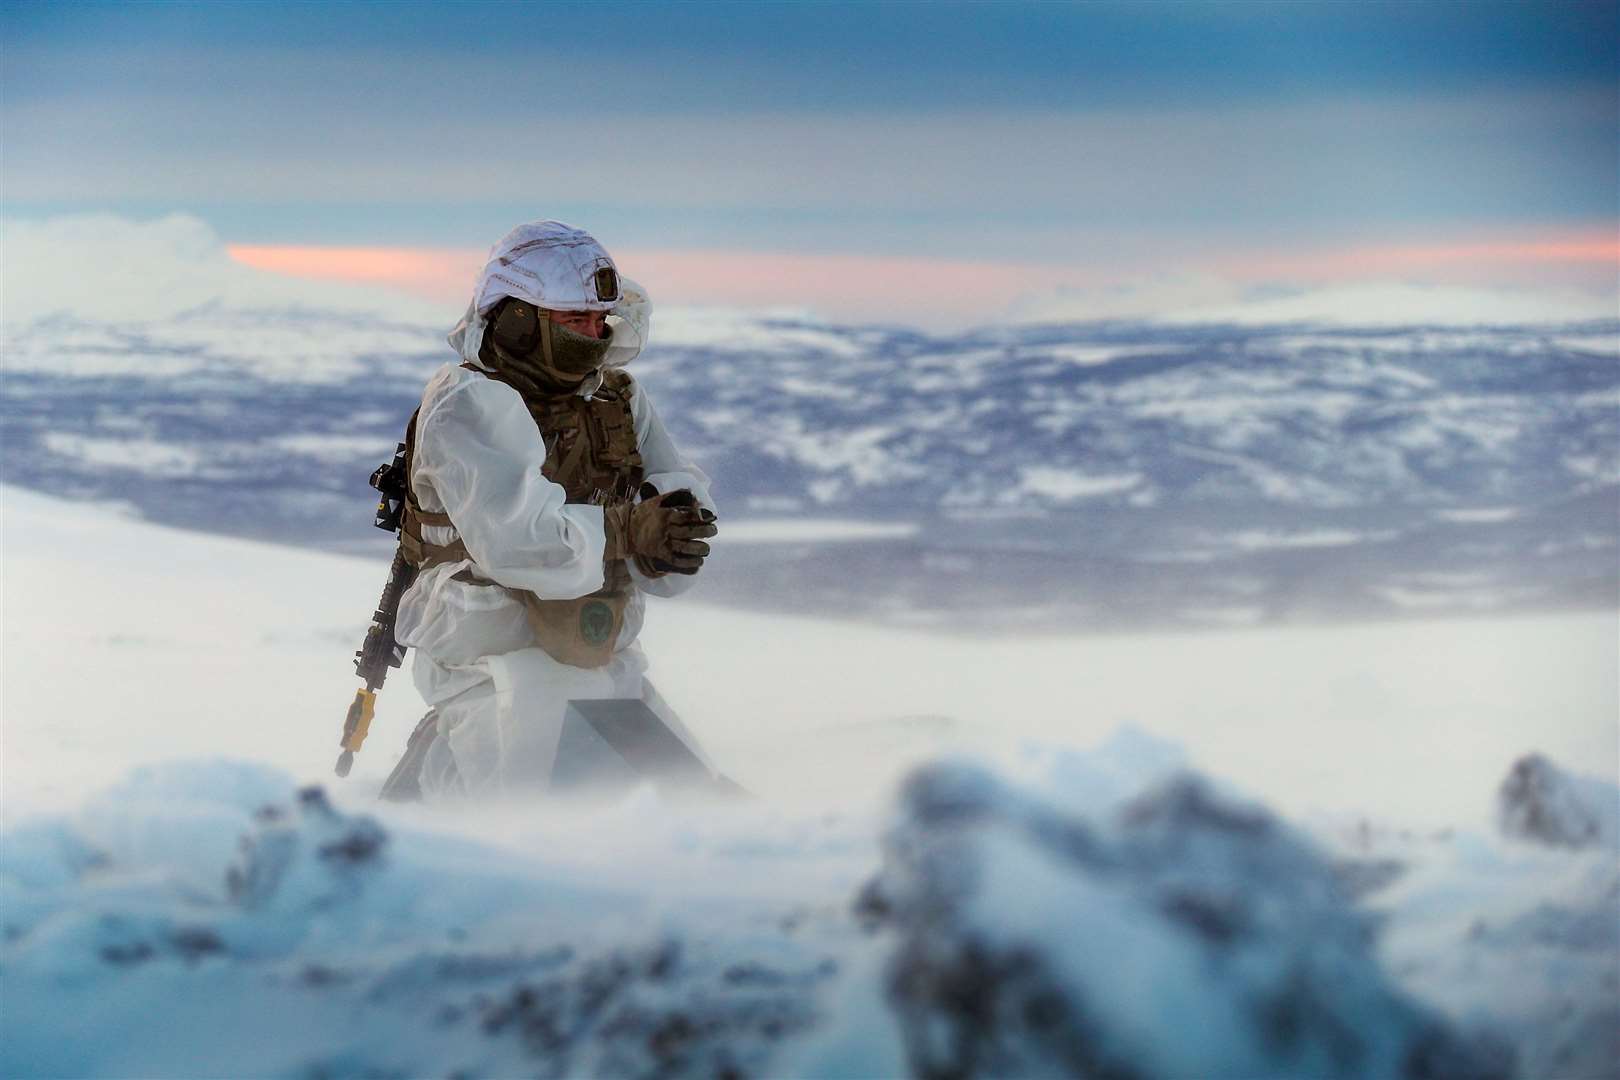 A Royal Marines assault engineer of 45 Commando preparing a charge during ice demolition training in the Arctic Circle, taken by Leading Photographer Stevie Burke (LPhot Stevie Burke/MoD/Crown Copyright)